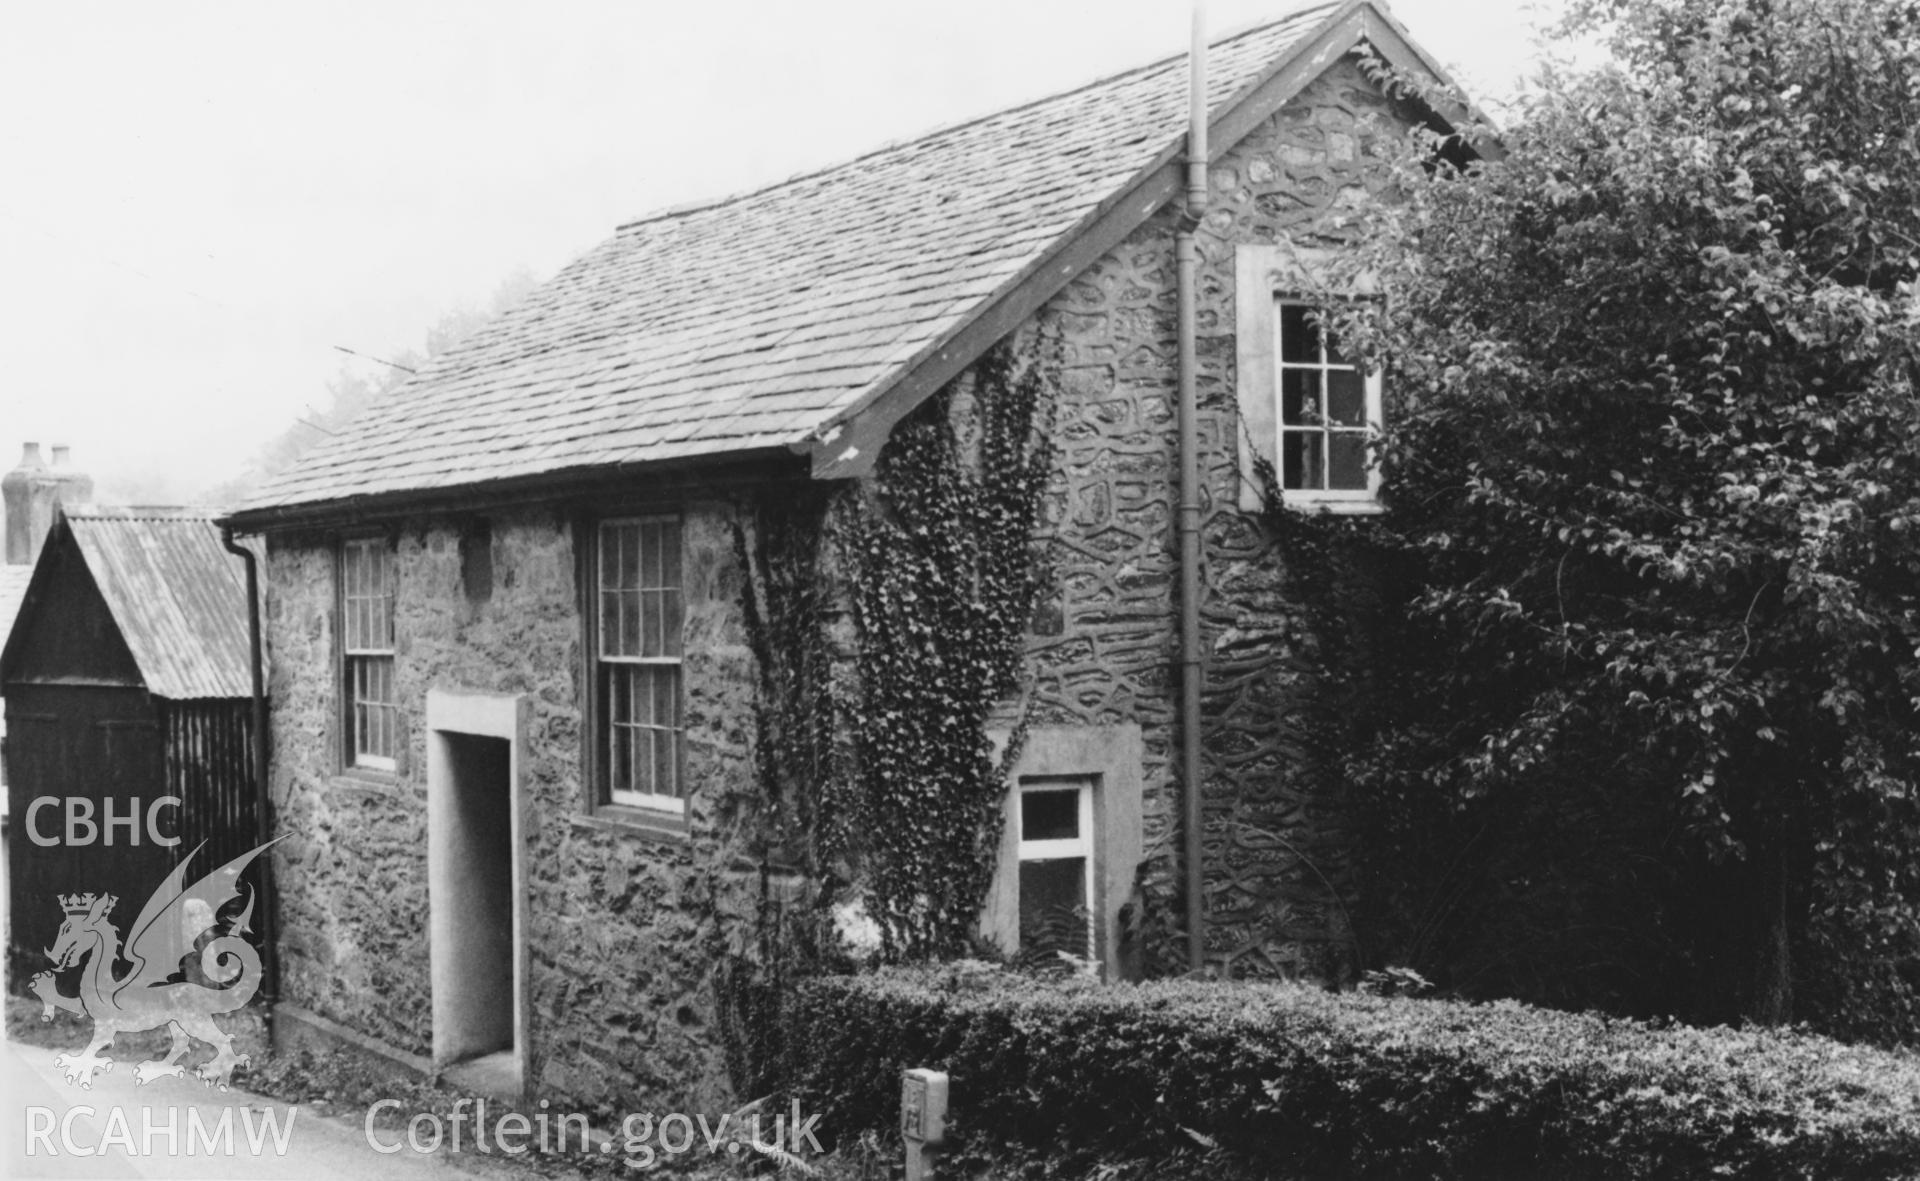 Digital copy of a black and white print dated 21st Sept 1998, showing exterior long wall entry elevation of Carmel Independent Chapel, Commins, near Llanrhaedr-ym-Mochnant. From the Philip Griffiths Collection.